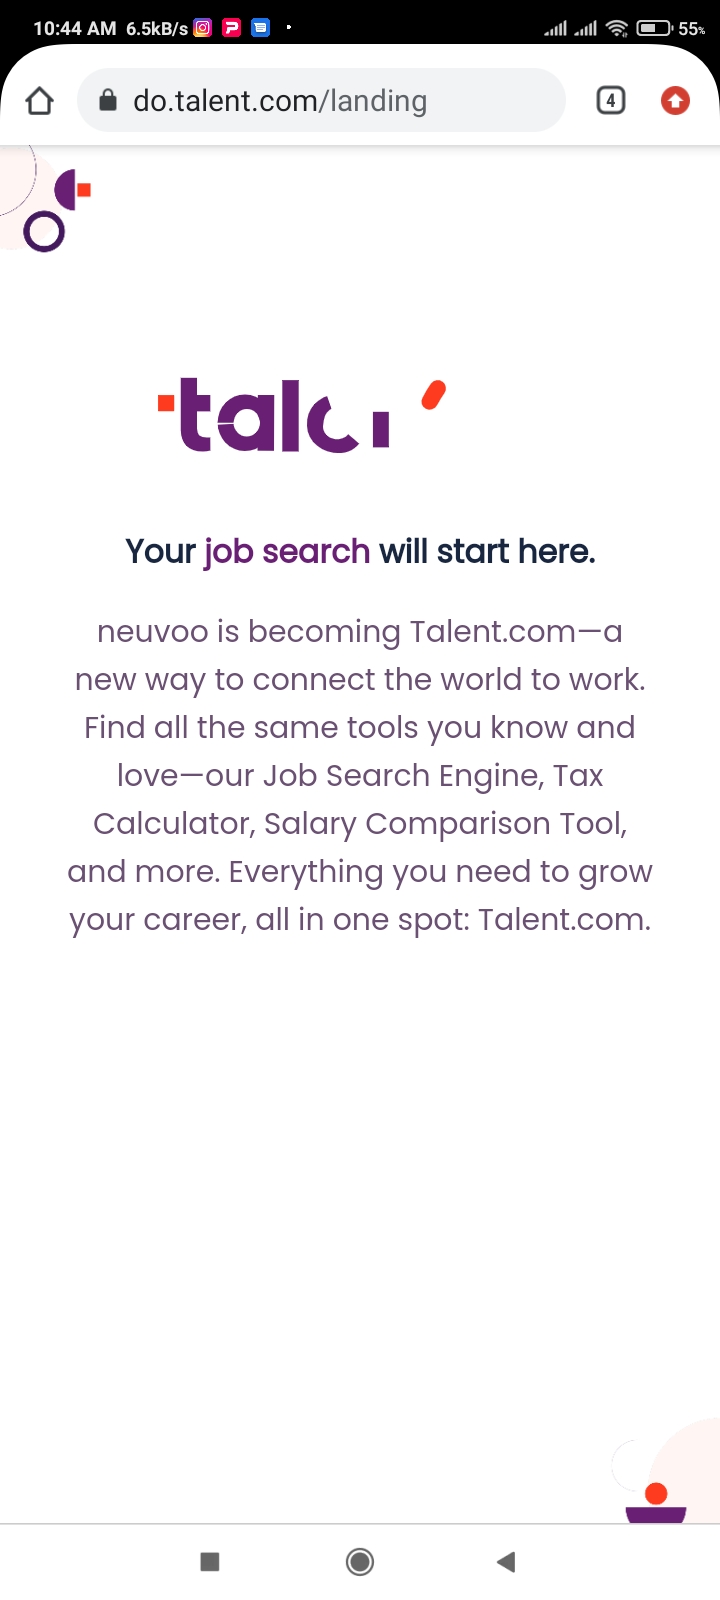 LR ER VURCRTC TESS all ll F @ 55+

() #&amp; do.talent.com/landing ® ©

¢
Oo

‘talc’

Your job search will start here.

neuvoo is becoming Talent.com—a
new way to connect the world to work.
Find all the same tools you know and
love—our Job Search Engine, Tax
Calculator, Salary Comparison Tool,
and more. Everything you need to grow
your career, all in one spot: Talent.com.